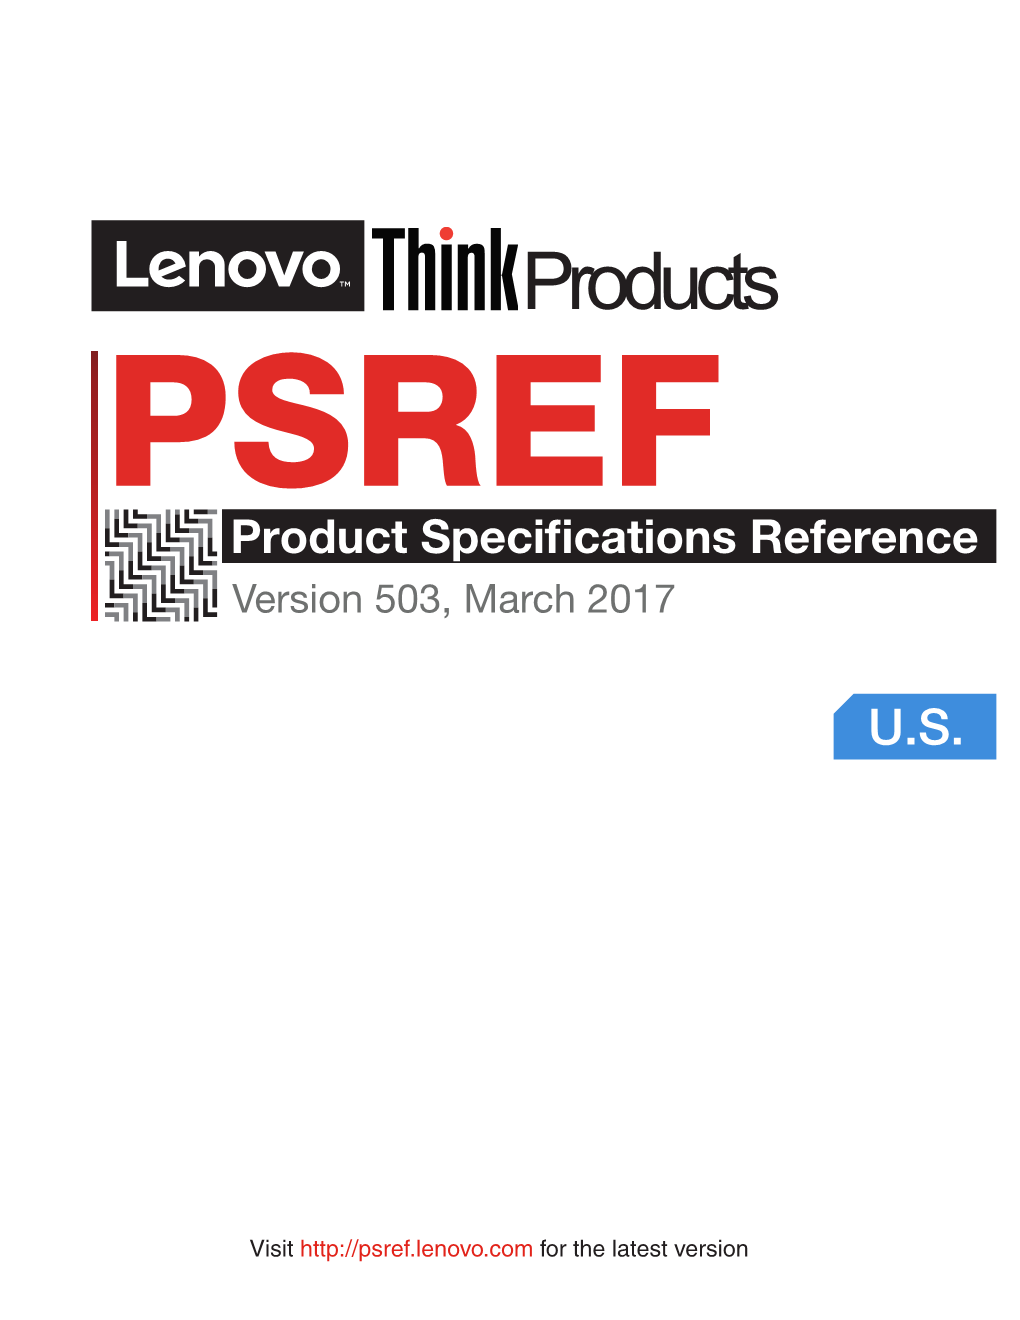 Products PSREF Product Specifications Reference Version 503, March 2017